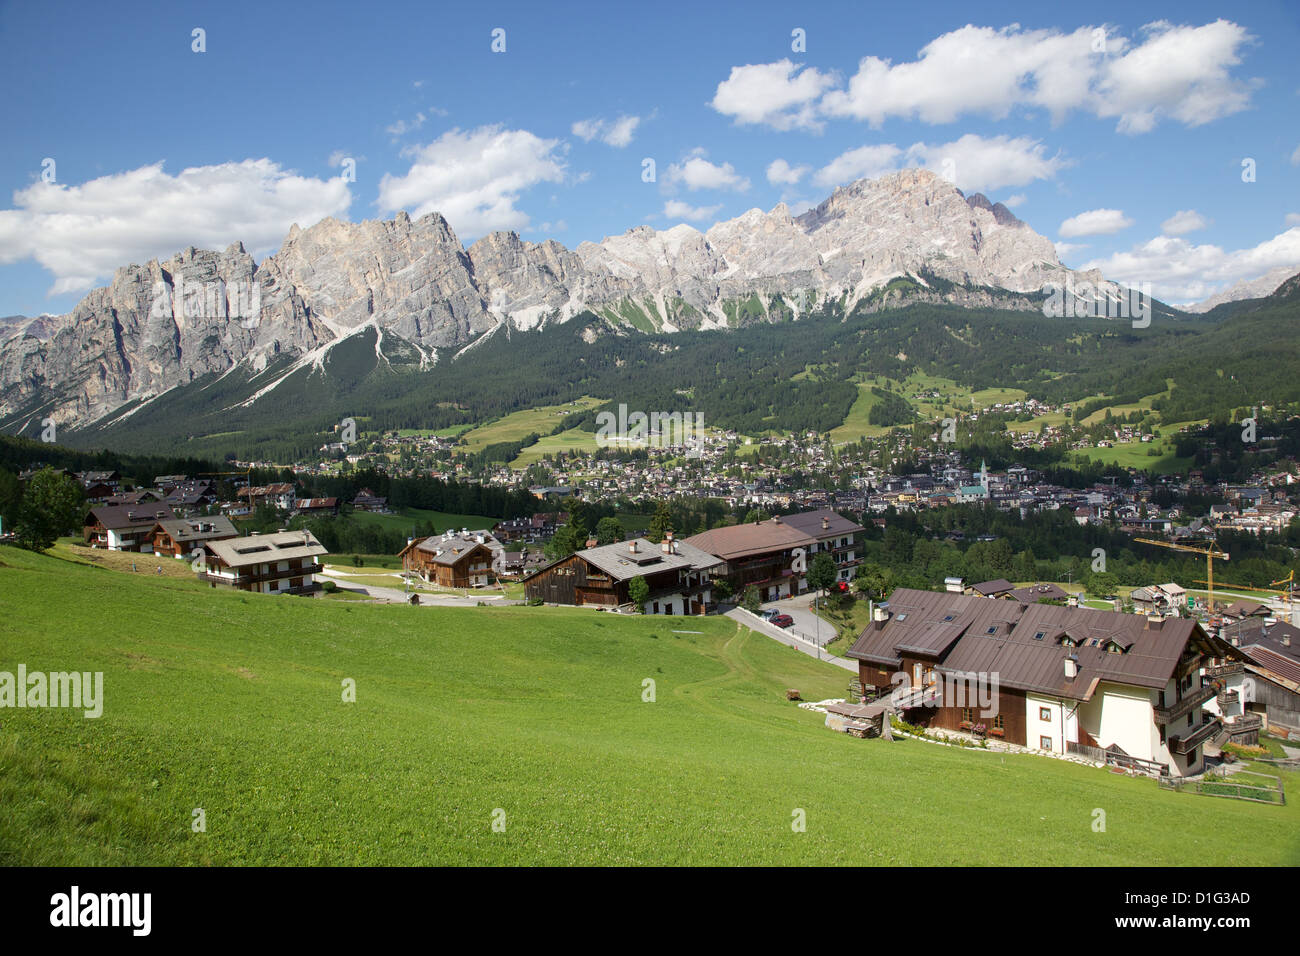 View of town and mountains, Cortina d' Ampezzo, Belluno Province, Veneto, Dolomites, Italy, Europe Stock Photo